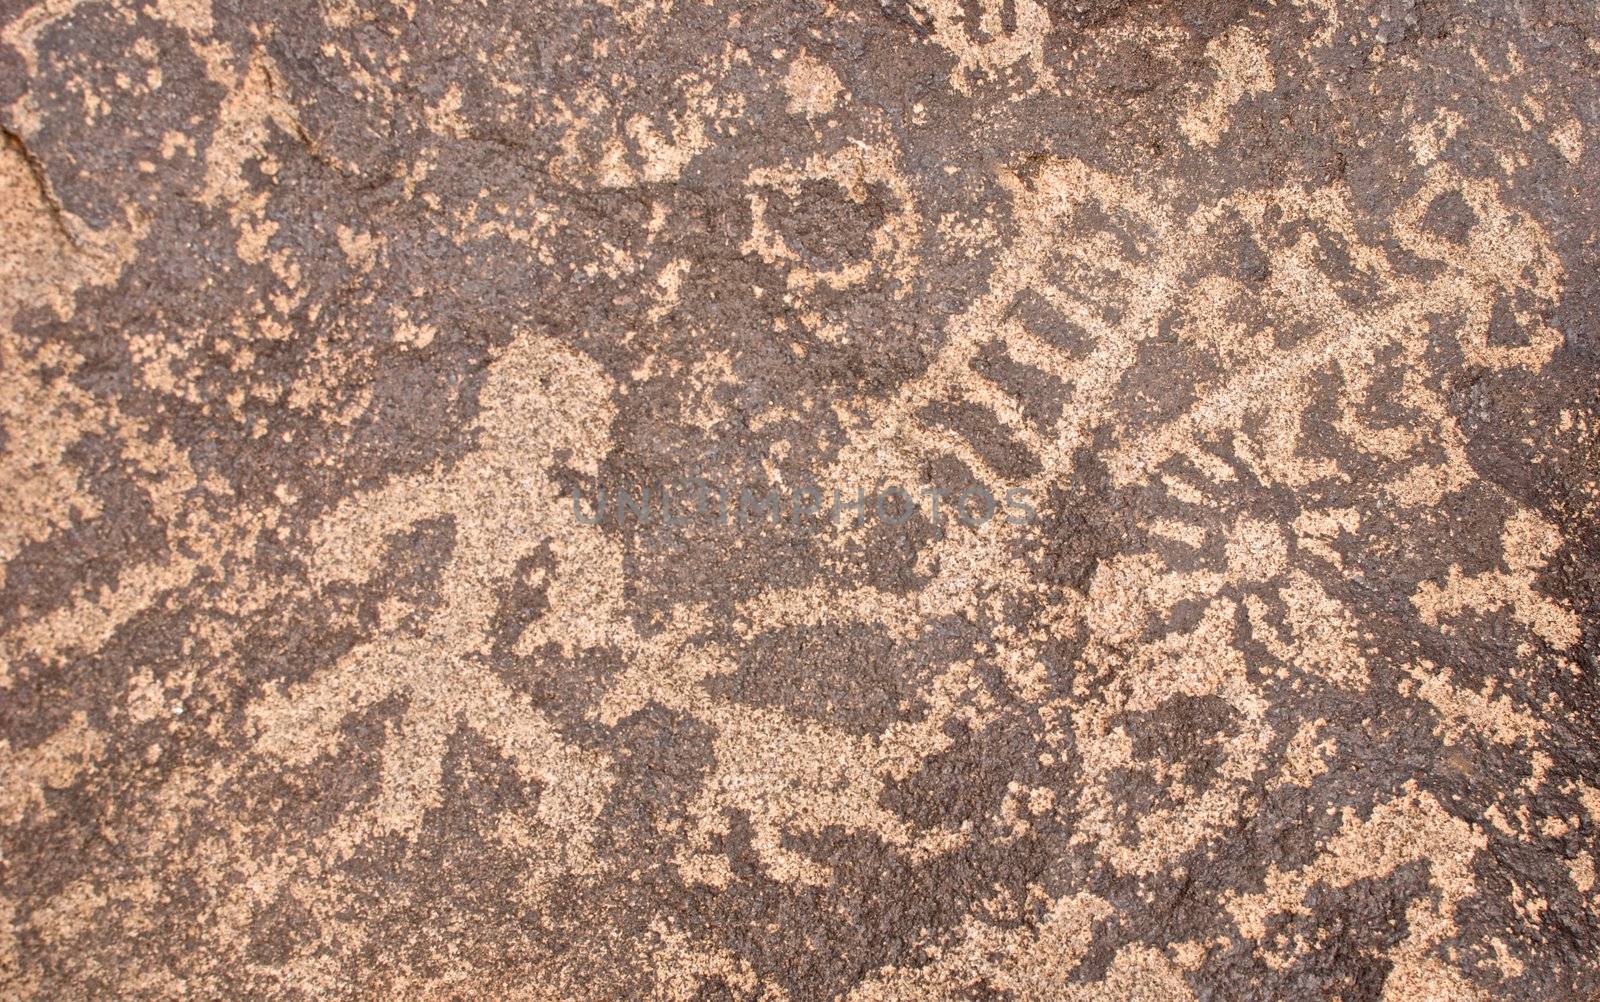 Ancient symbols carved into rocks in the Arizona desert showing a man, ladder and the sun